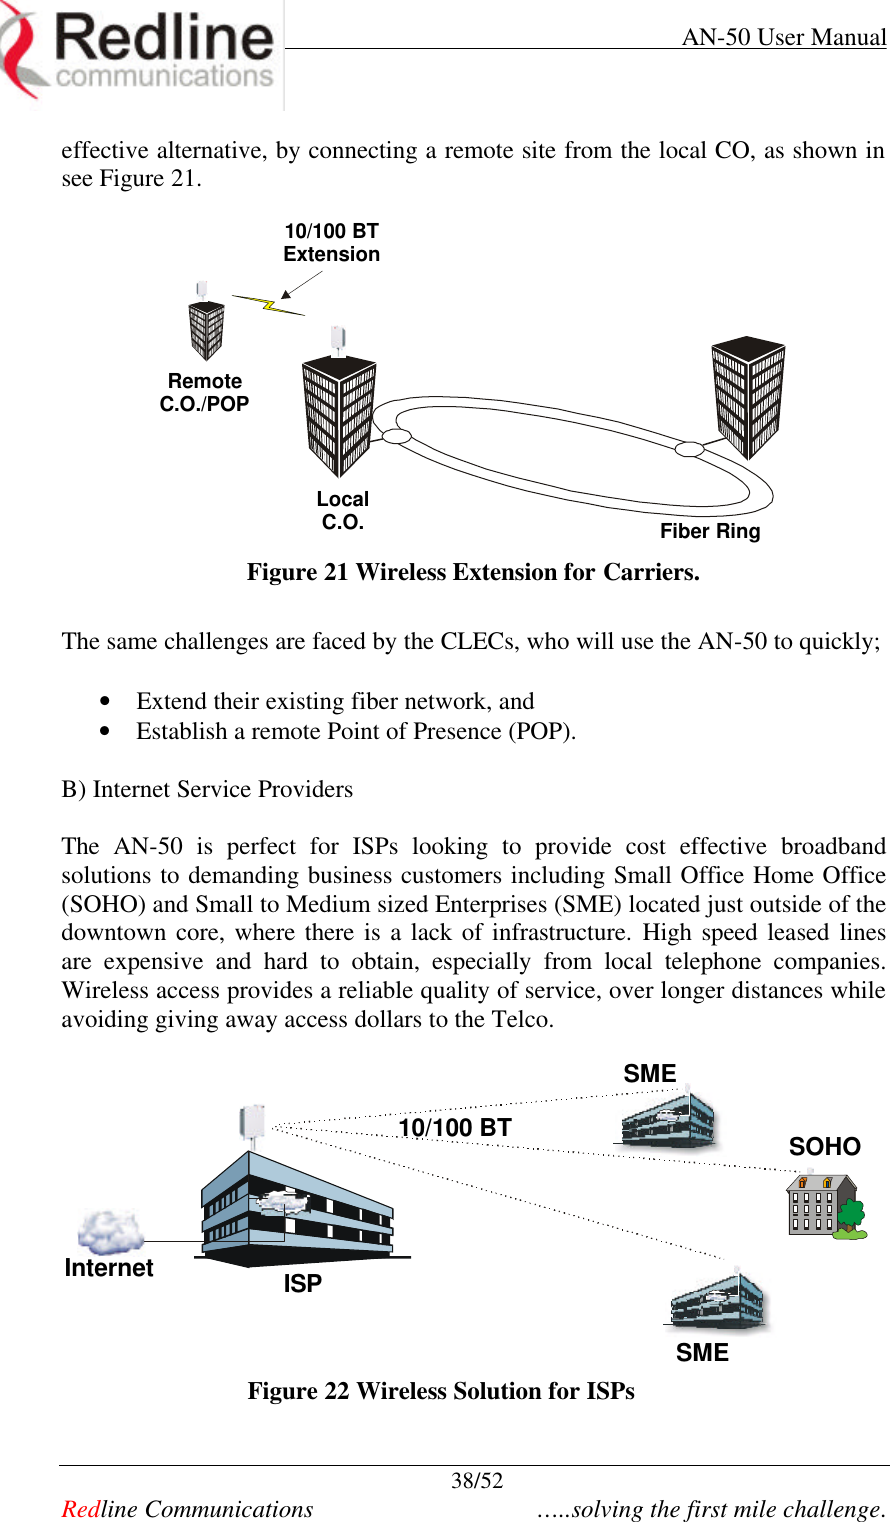     AN-50 User Manual  38/52   Redline Communications    …..solving the first mile challenge. effective alternative, by connecting a remote site from the local CO, as shown in see Figure 21.    Fiber RingRemoteC.O./POPLocalC.O.10/100 BTExtension Figure 21 Wireless Extension for Carriers.  The same challenges are faced by the CLECs, who will use the AN-50 to quickly;  • Extend their existing fiber network, and  • Establish a remote Point of Presence (POP).     B) Internet Service Providers  The AN-50 is perfect for ISPs looking to provide cost effective broadband solutions to demanding business customers including Small Office Home Office (SOHO) and Small to Medium sized Enterprises (SME) located just outside of the downtown core, where there is a lack of infrastructure. High speed leased lines are expensive and hard to obtain, especially from local telephone companies. Wireless access provides a reliable quality of service, over longer distances while avoiding giving away access dollars to the Telco.    Internet ISPSMESOHOSME10/100 BT Figure 22 Wireless Solution for ISPs  